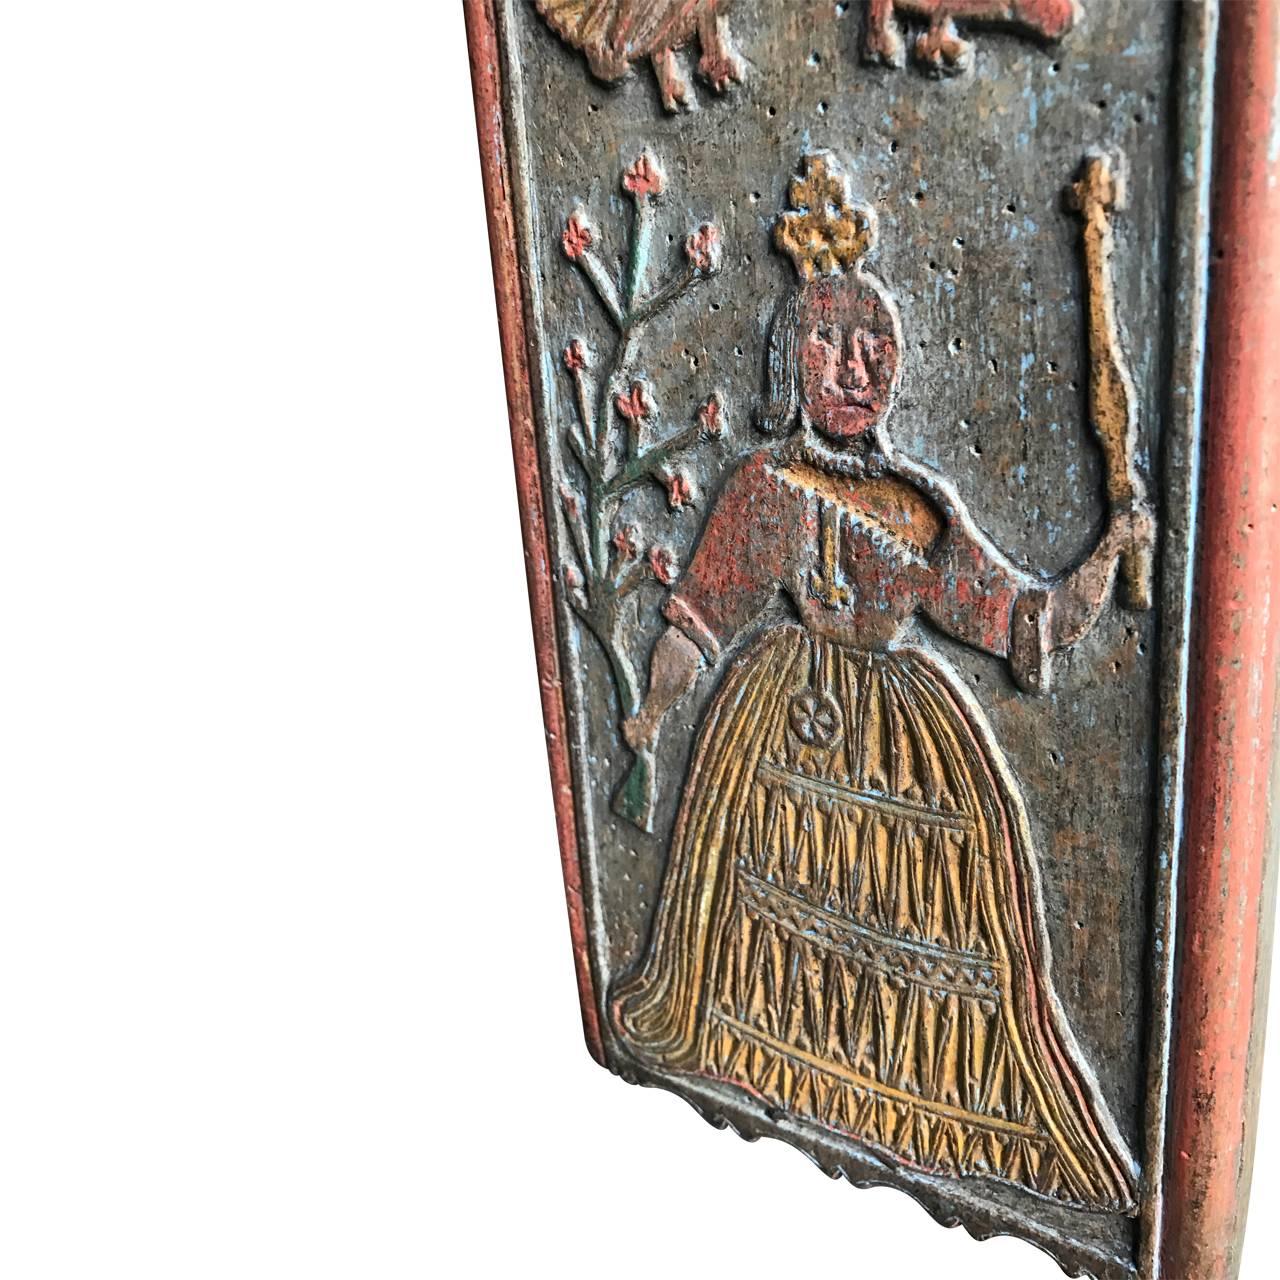 Charming piece of Scandinavian folk art as a love-token. The mangleboard is decorated in original colors and carvings, with "AMPD" initials and dated 1839. The "D" stands for "AMP"'s Daughter. Further carvings are queen